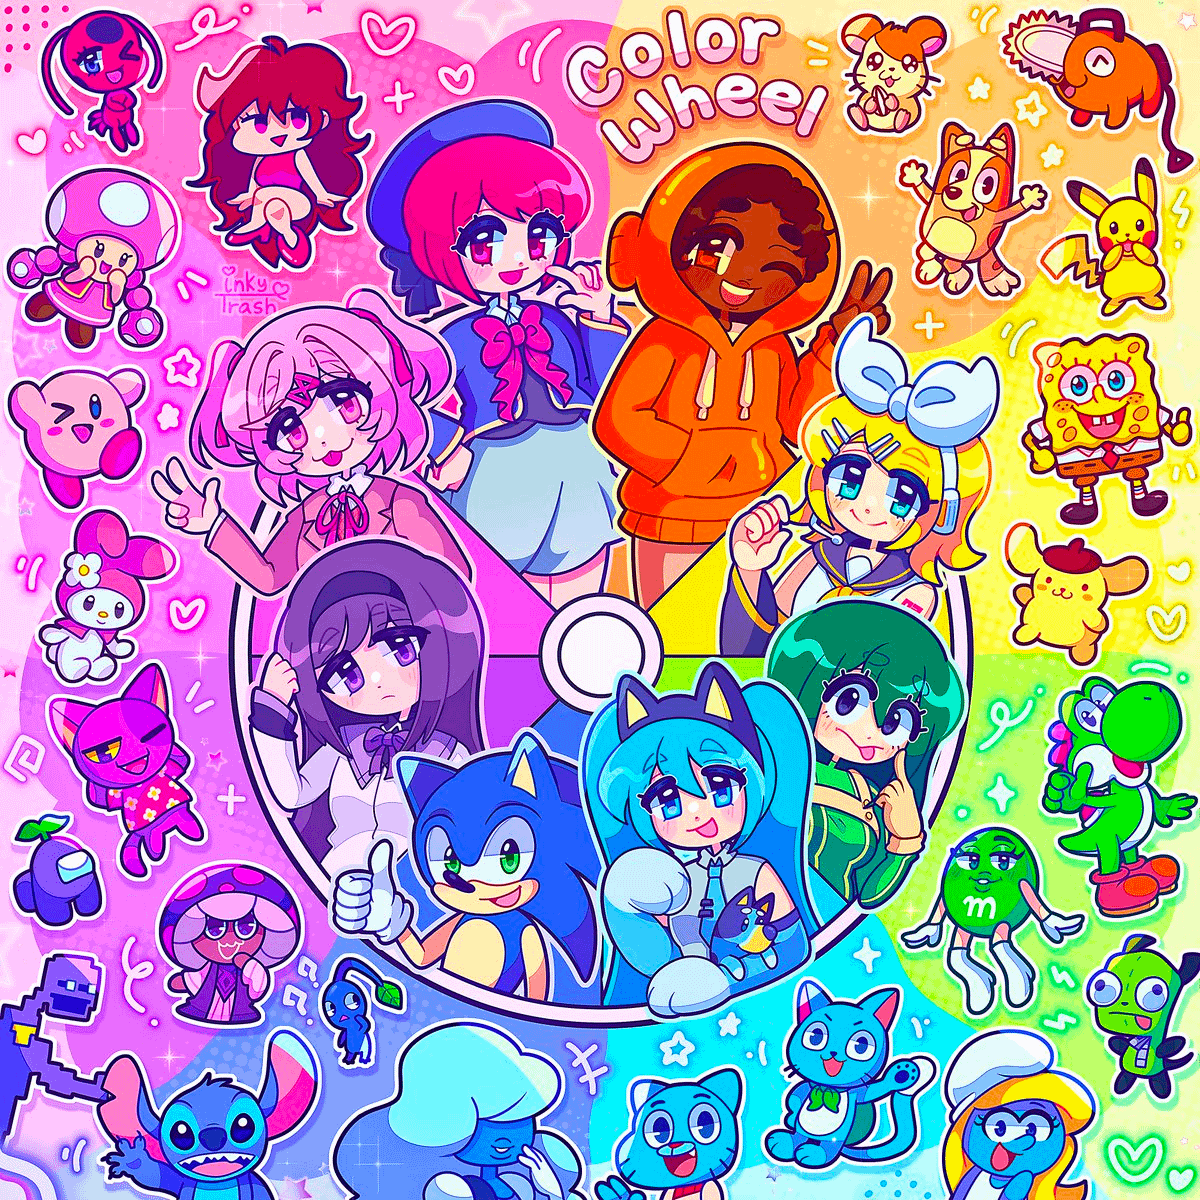 AND ITS FINALLY DONE!! Knucles, Kenny, Pikachu, Jumbo josh, Hatsune Miku,  Huggy Wuggy, Purple guy and Kirby in one place!!, Color Wheel Character  Challenge